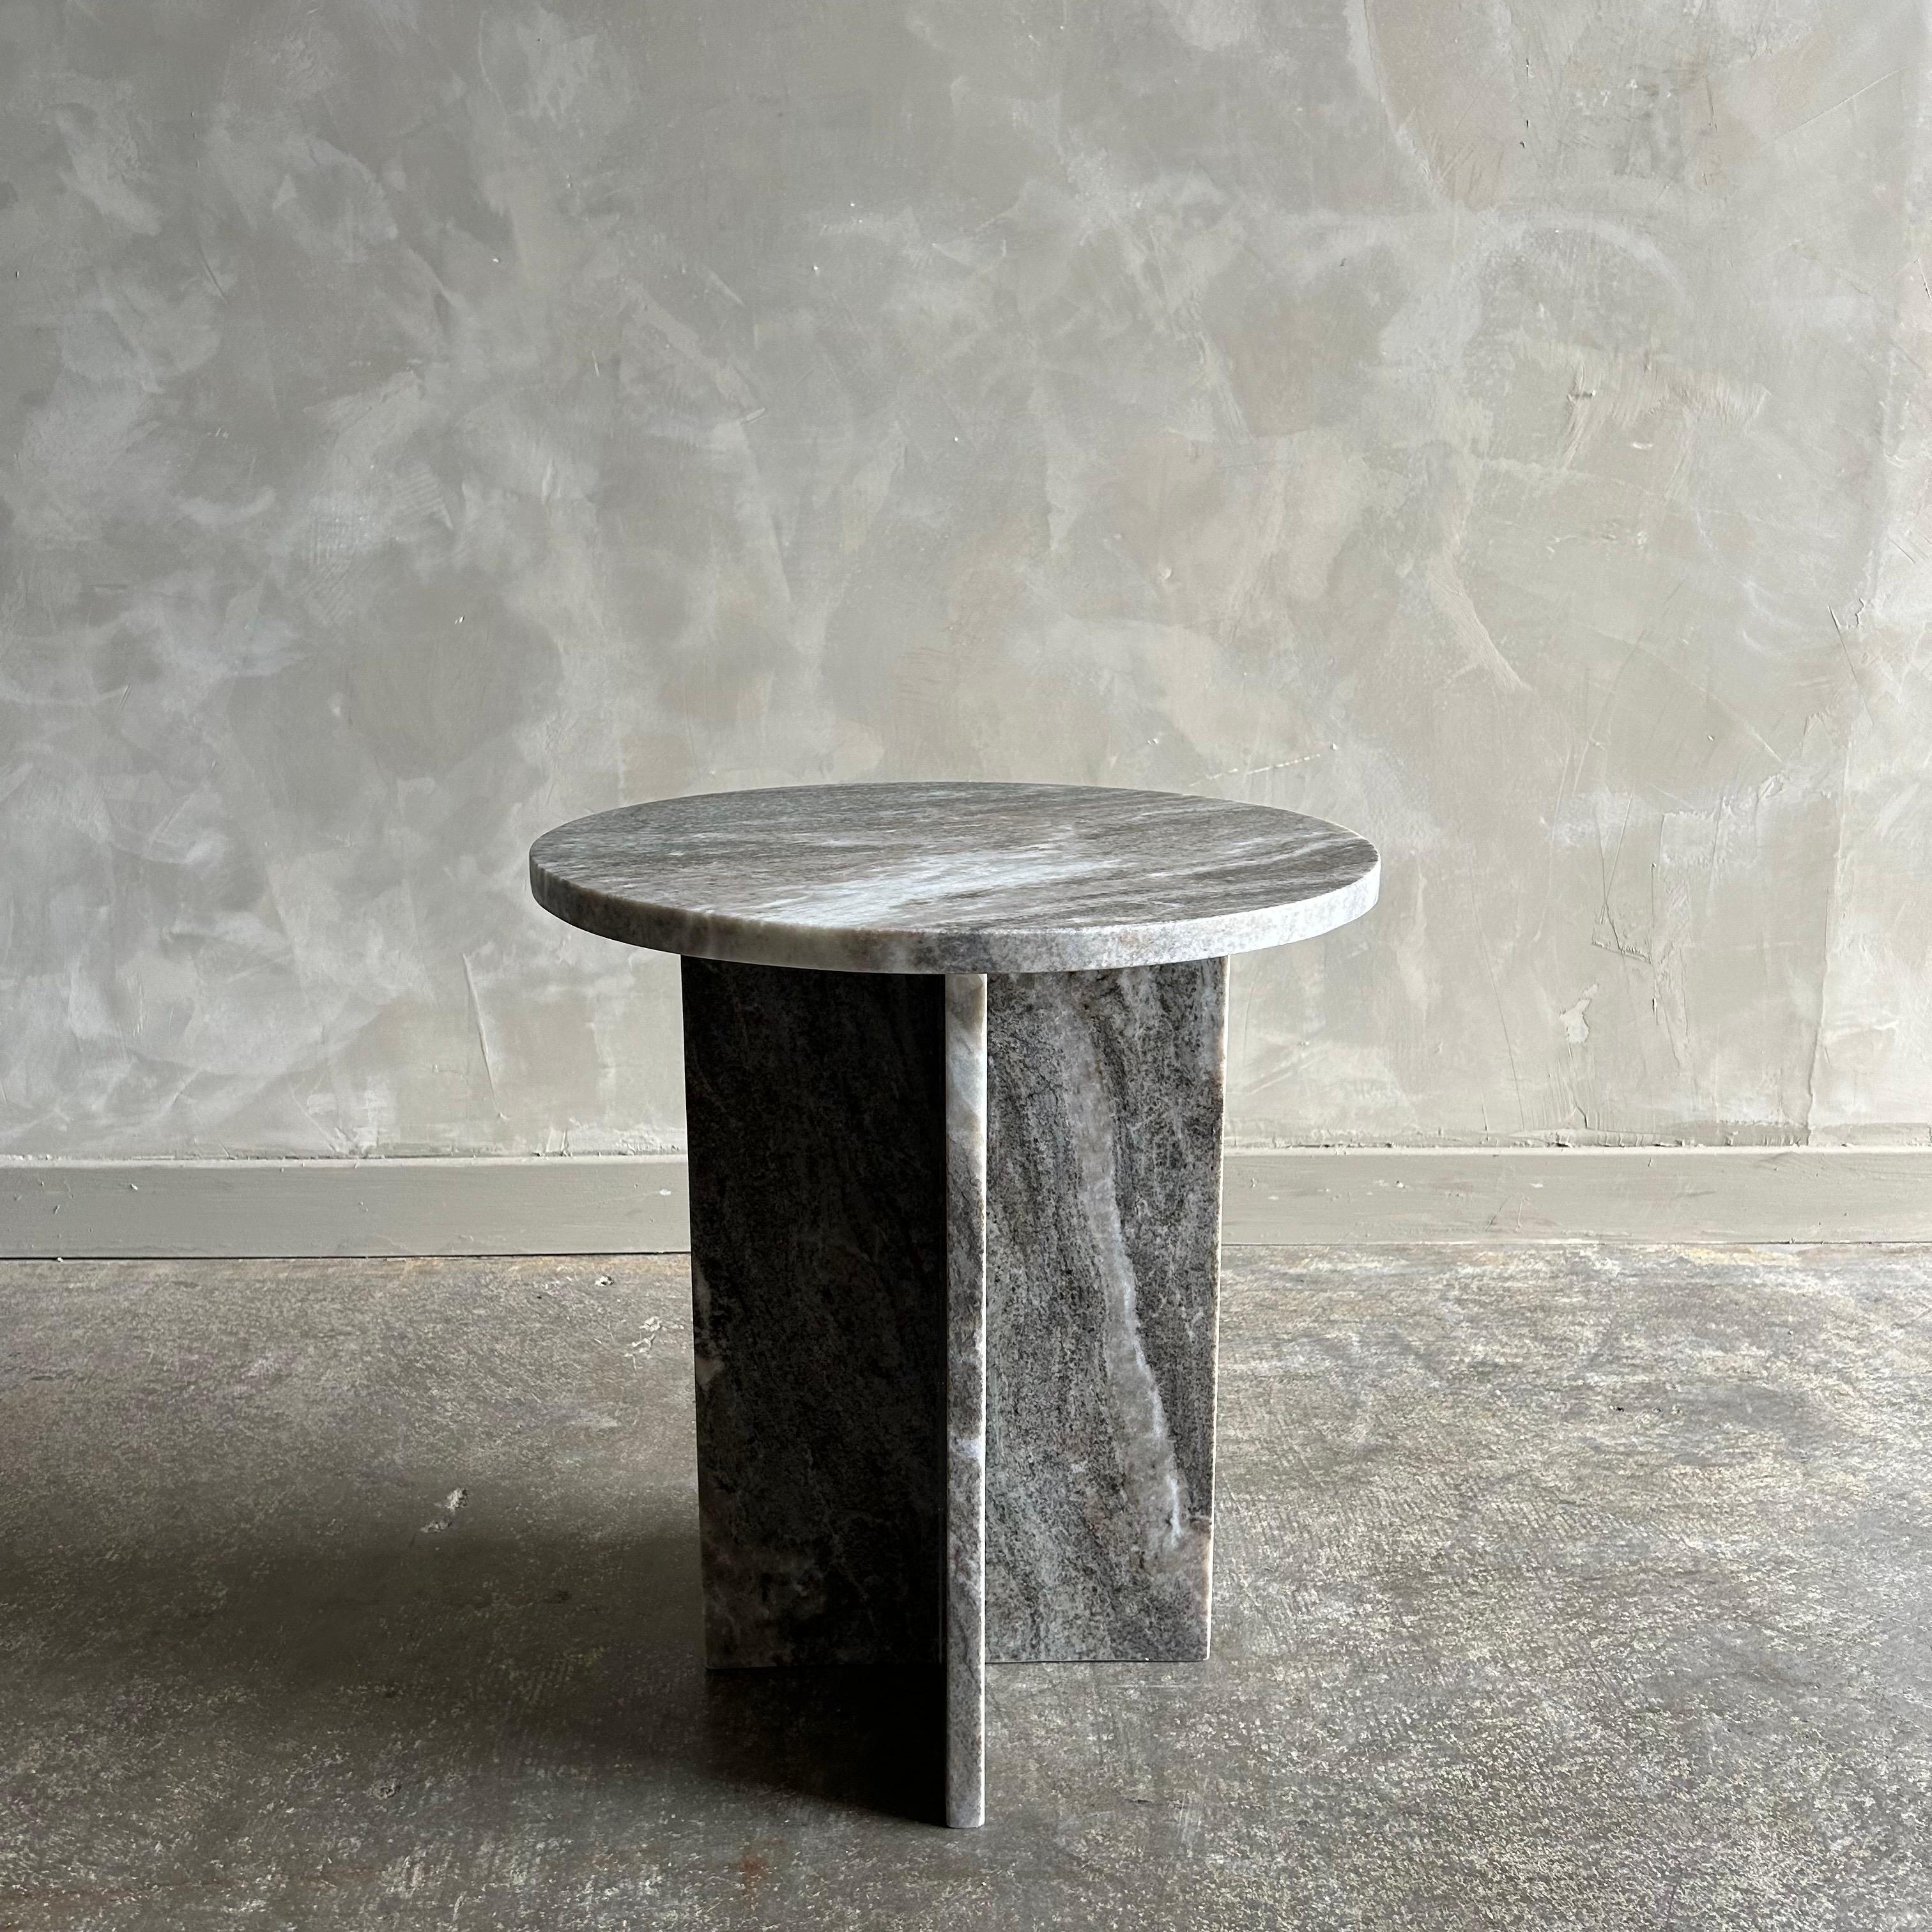 Marble accent table with X style base.
Colors: Gray, Brown, Cream, Green, Rust
Size: 18”rd. X 20”h
1 piece 
Care: Wipe spills with a damp cloth, dust regularly.